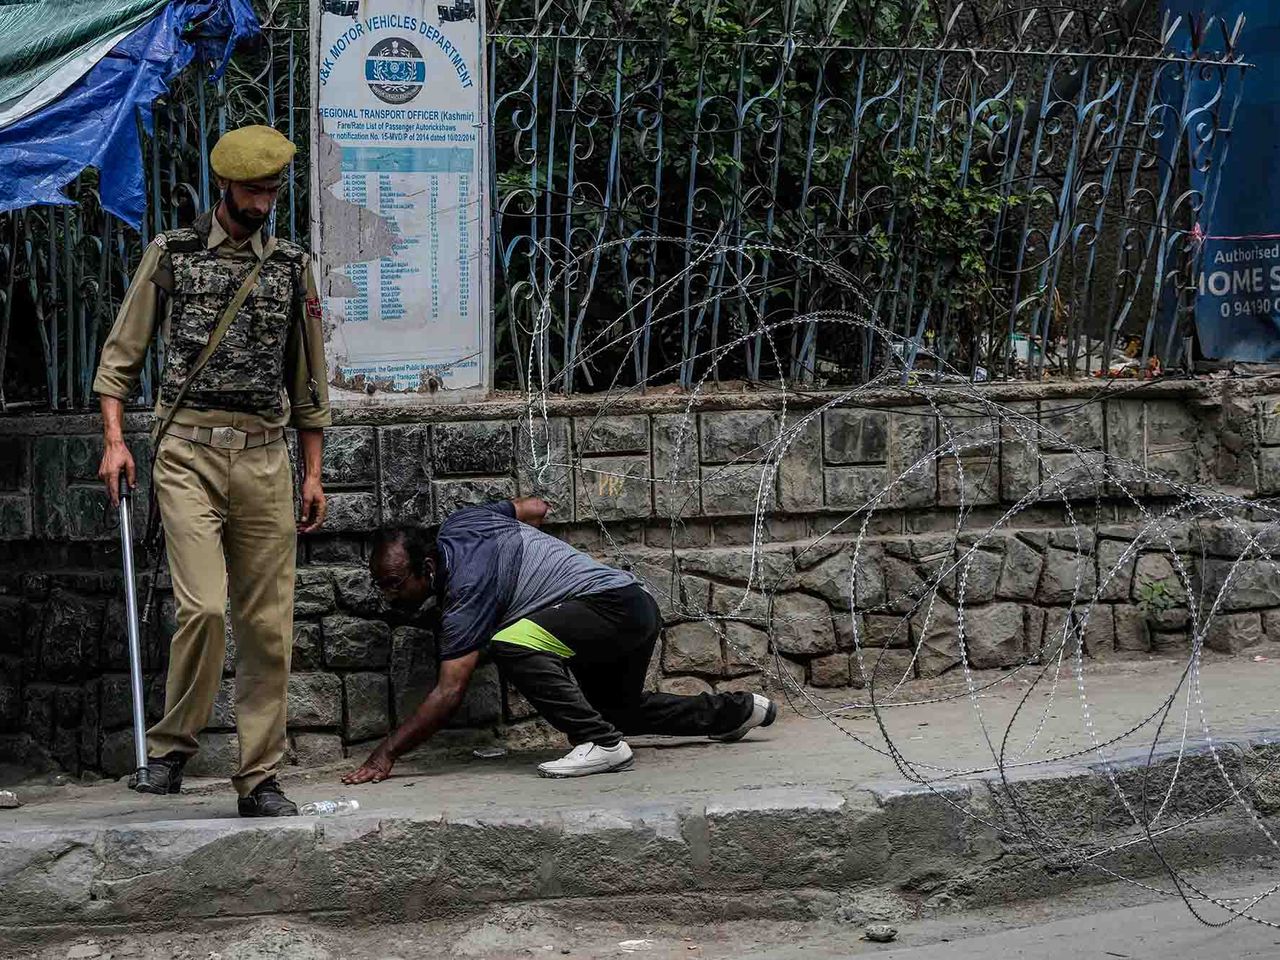 A Kashmiri man cross barbed wire set up by police as a roadblock during a restrictions in Srinagar, Indian controlled Kashmir, Sunday, Aug. 7, 2022. This project documents ongoing unrest in the long-disputed region of Kashmir, dating back to 1947, when India and Pakistan gained independence from Britain. Both nations claim Kashmir in its entirety, and each administers a portion of the region. In Indian-administered Kashmir, rebels have been fighting Indian rule for decades, seeking to unite the territory, either under Pakistani rule or as an independent country. India says that Pakistan supports armed insurgency in Kashmir. Pakistan denies the charge, saying it provides moral and diplomatic support only.